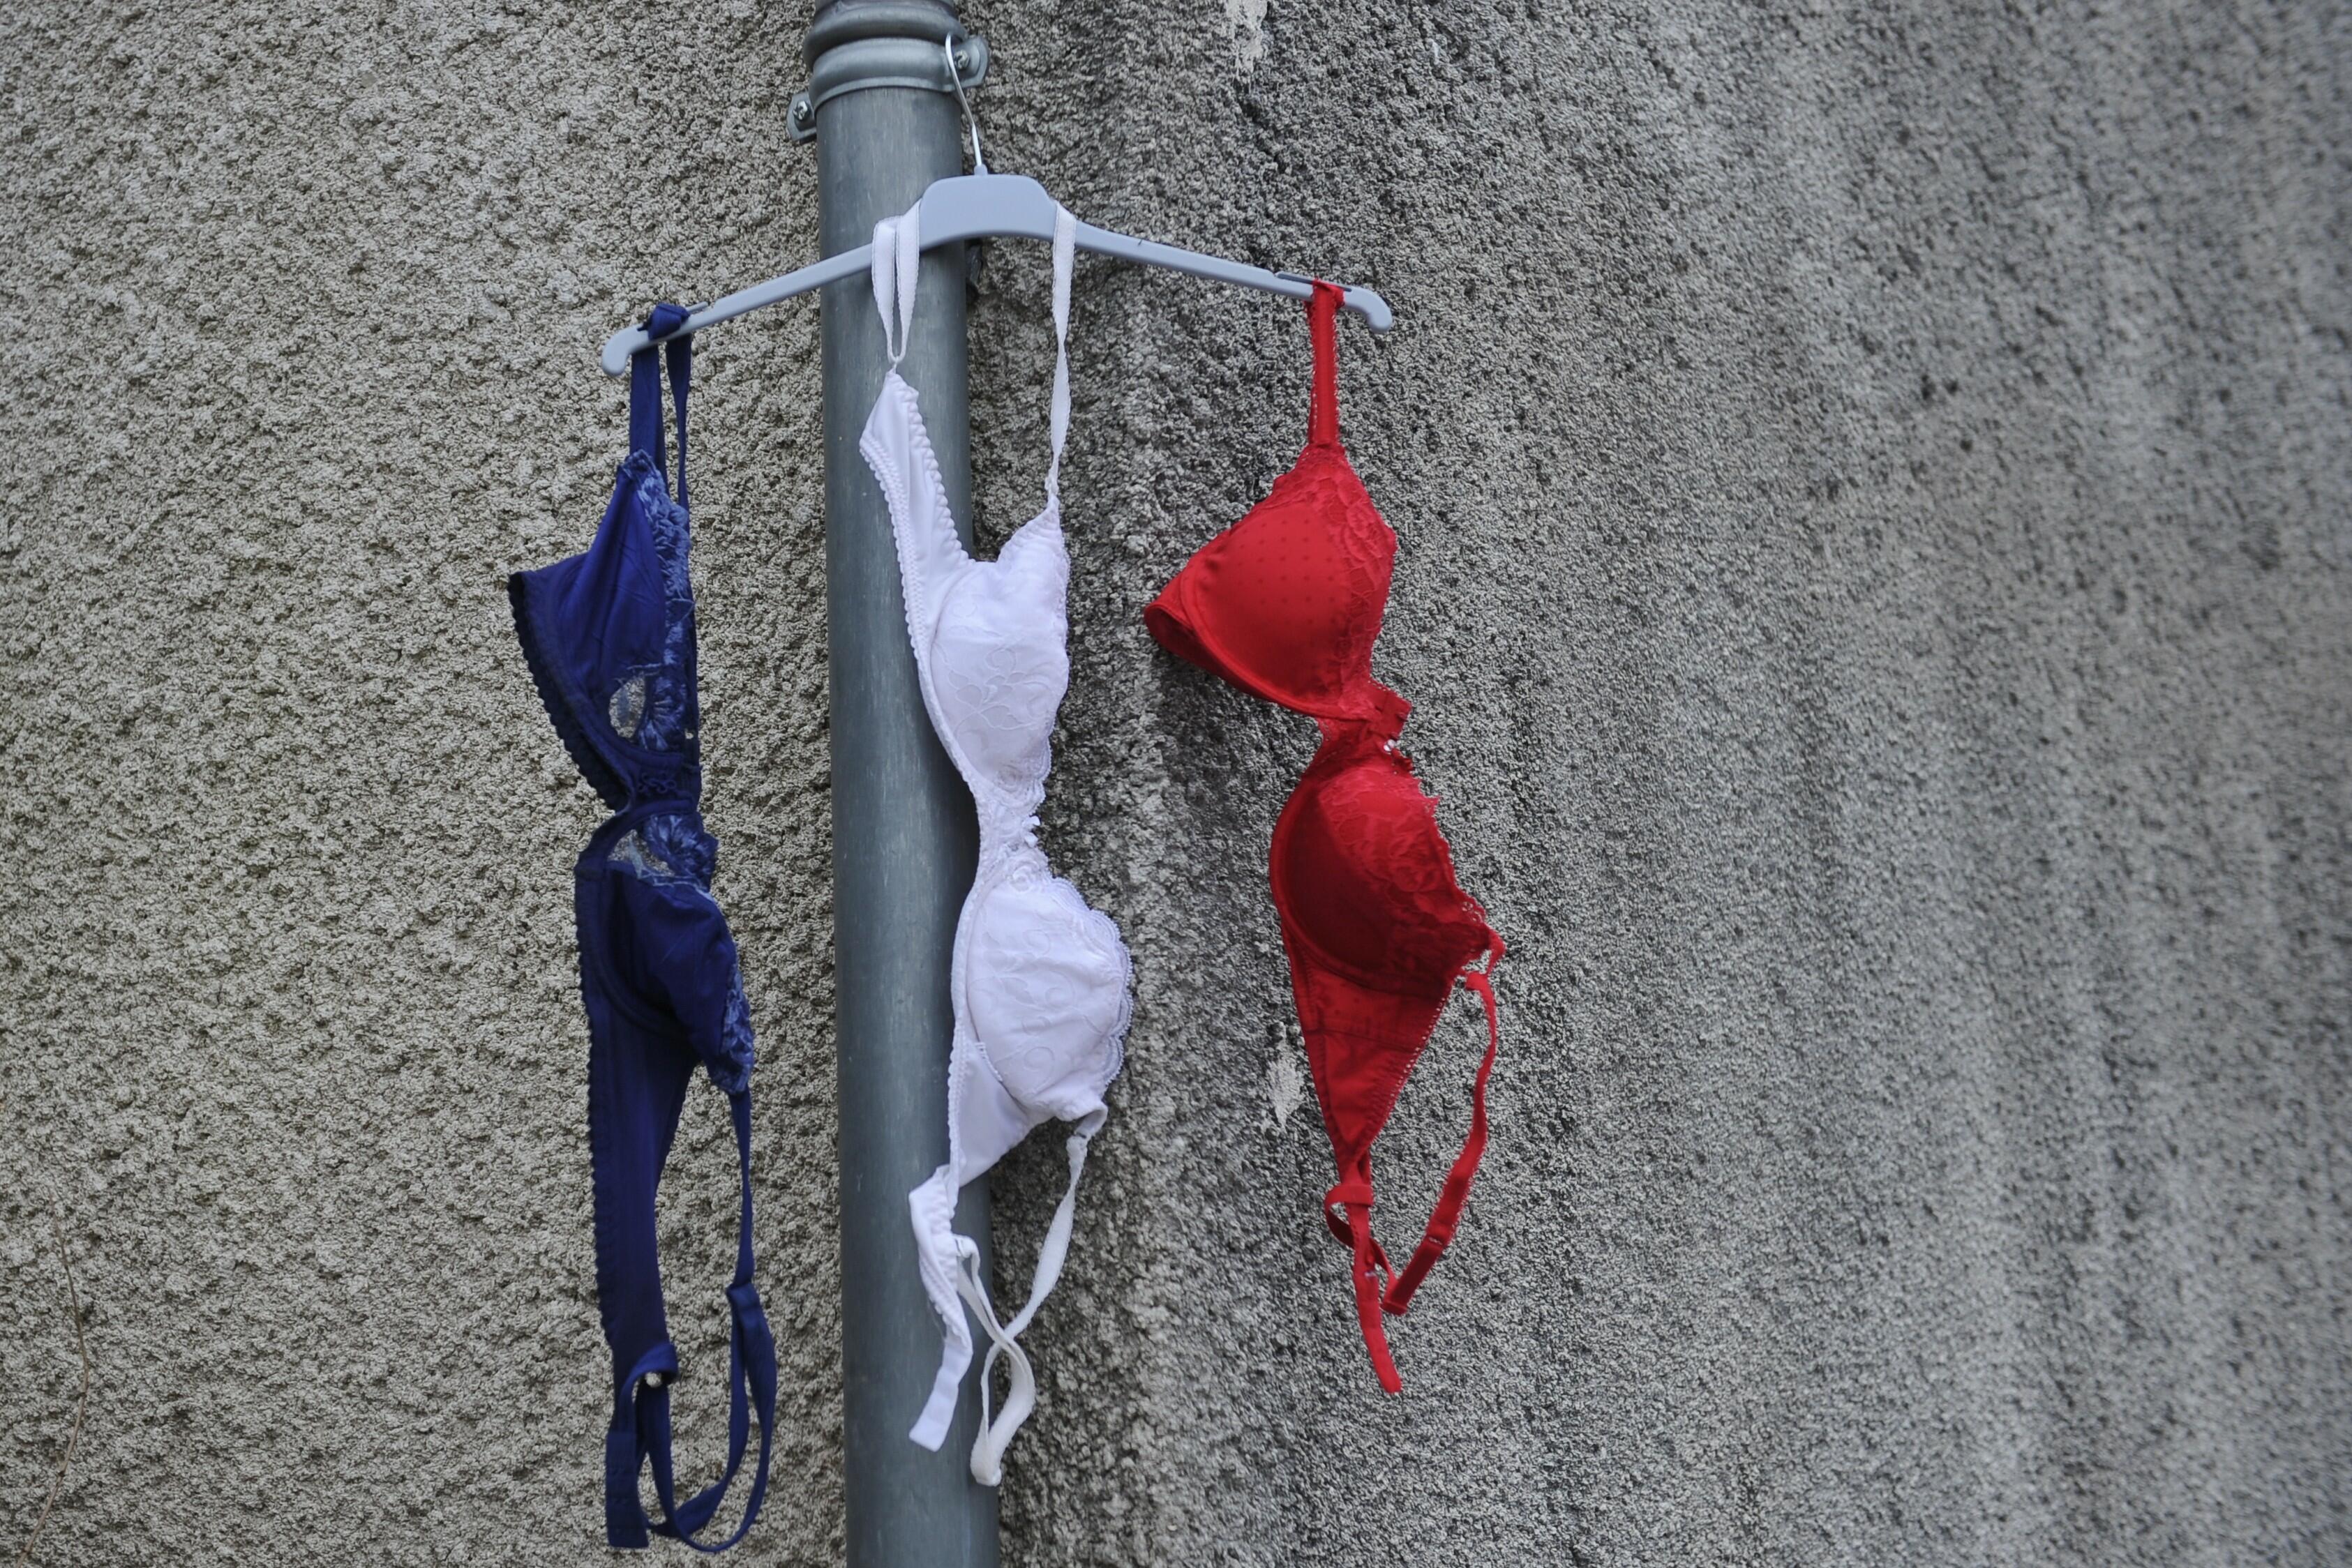 Bras in the colors of the French national flag hang from a house's gutter in La Rochelle, southwestern France, on NOvember 27, 2015 during a day of national tribute to the 130 people killed in the November 13 Paris attacks.  / AFP / XAVIER LEOTY        (P